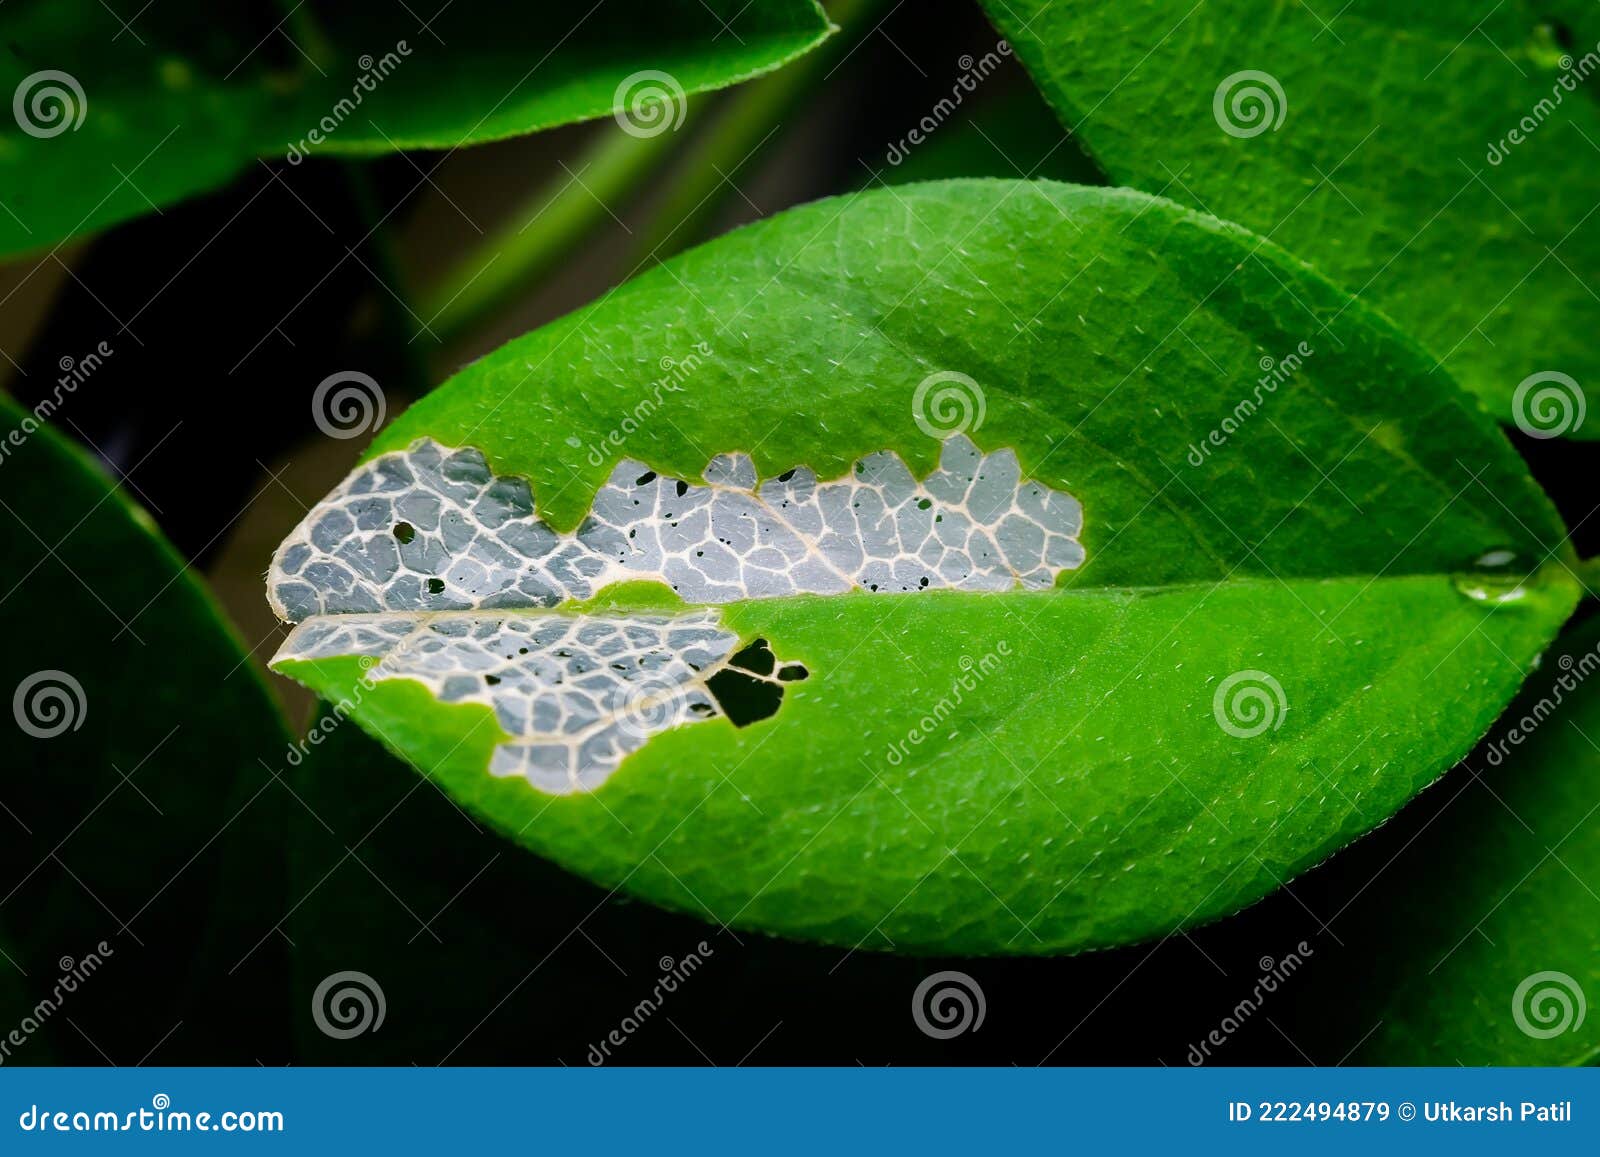 leaf veins exposed by the depletion of chlorophyll of the plant leaf. used selective focus